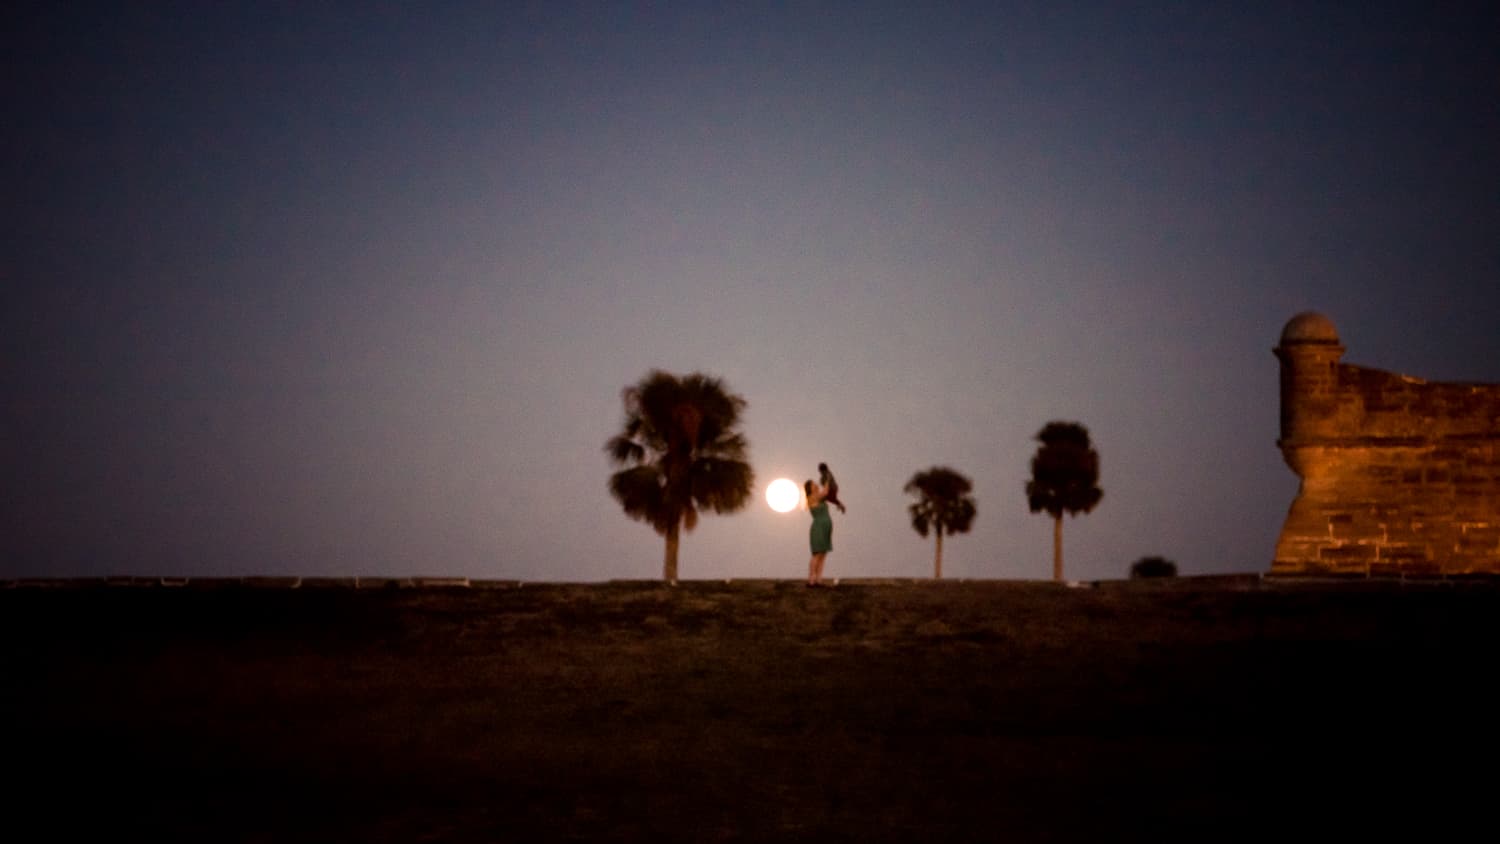 Playing in front of a full moon in St. Augustine, Florida on our Christmas road trip.